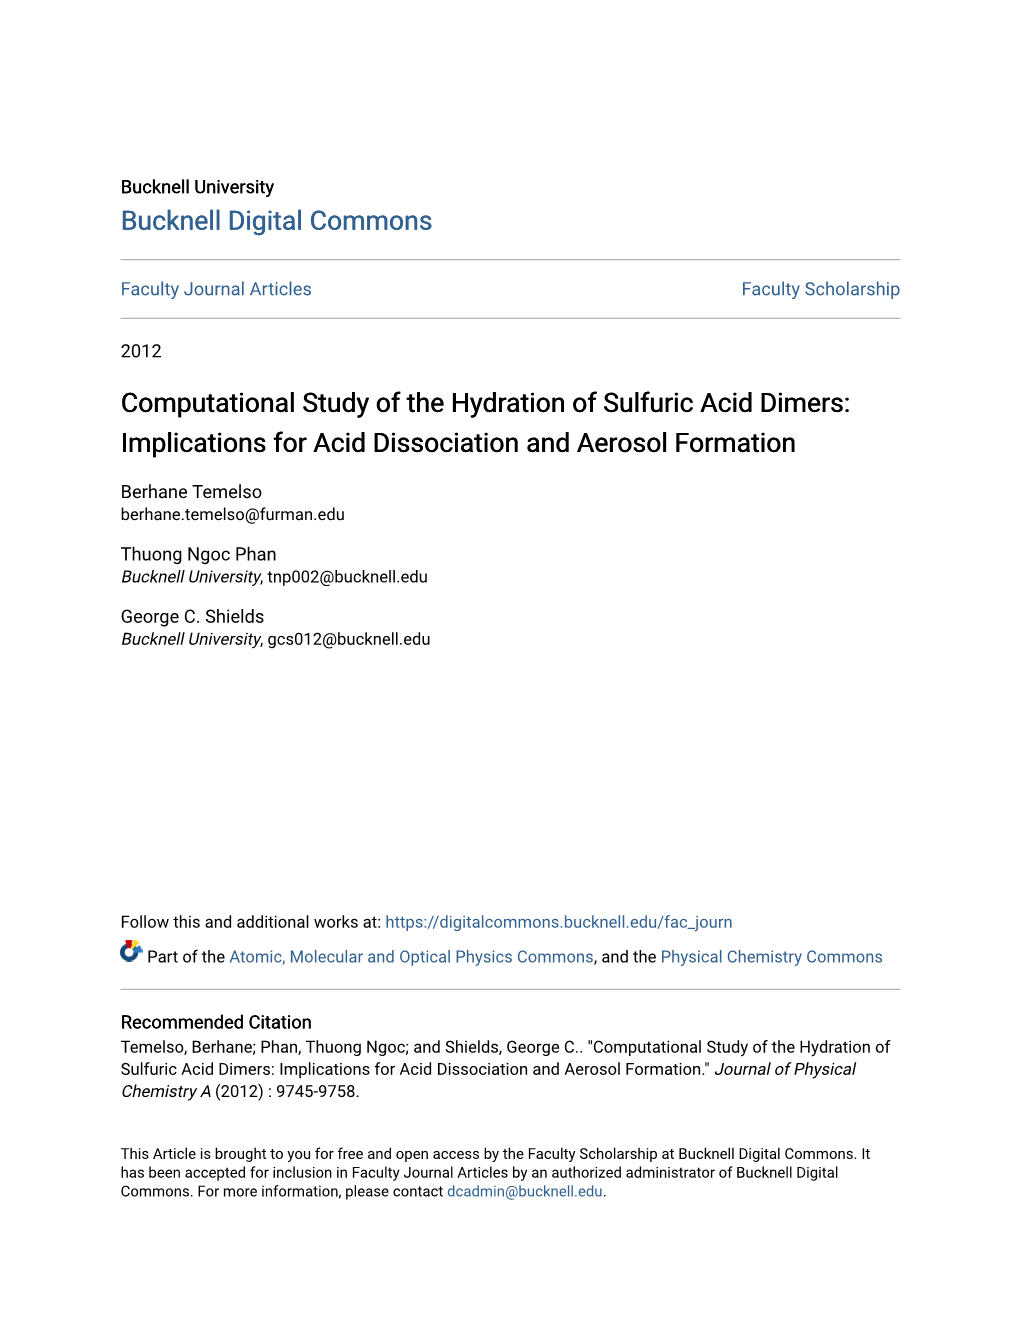 Computational Study of the Hydration of Sulfuric Acid Dimers: Implications for Acid Dissociation and Aerosol Formation